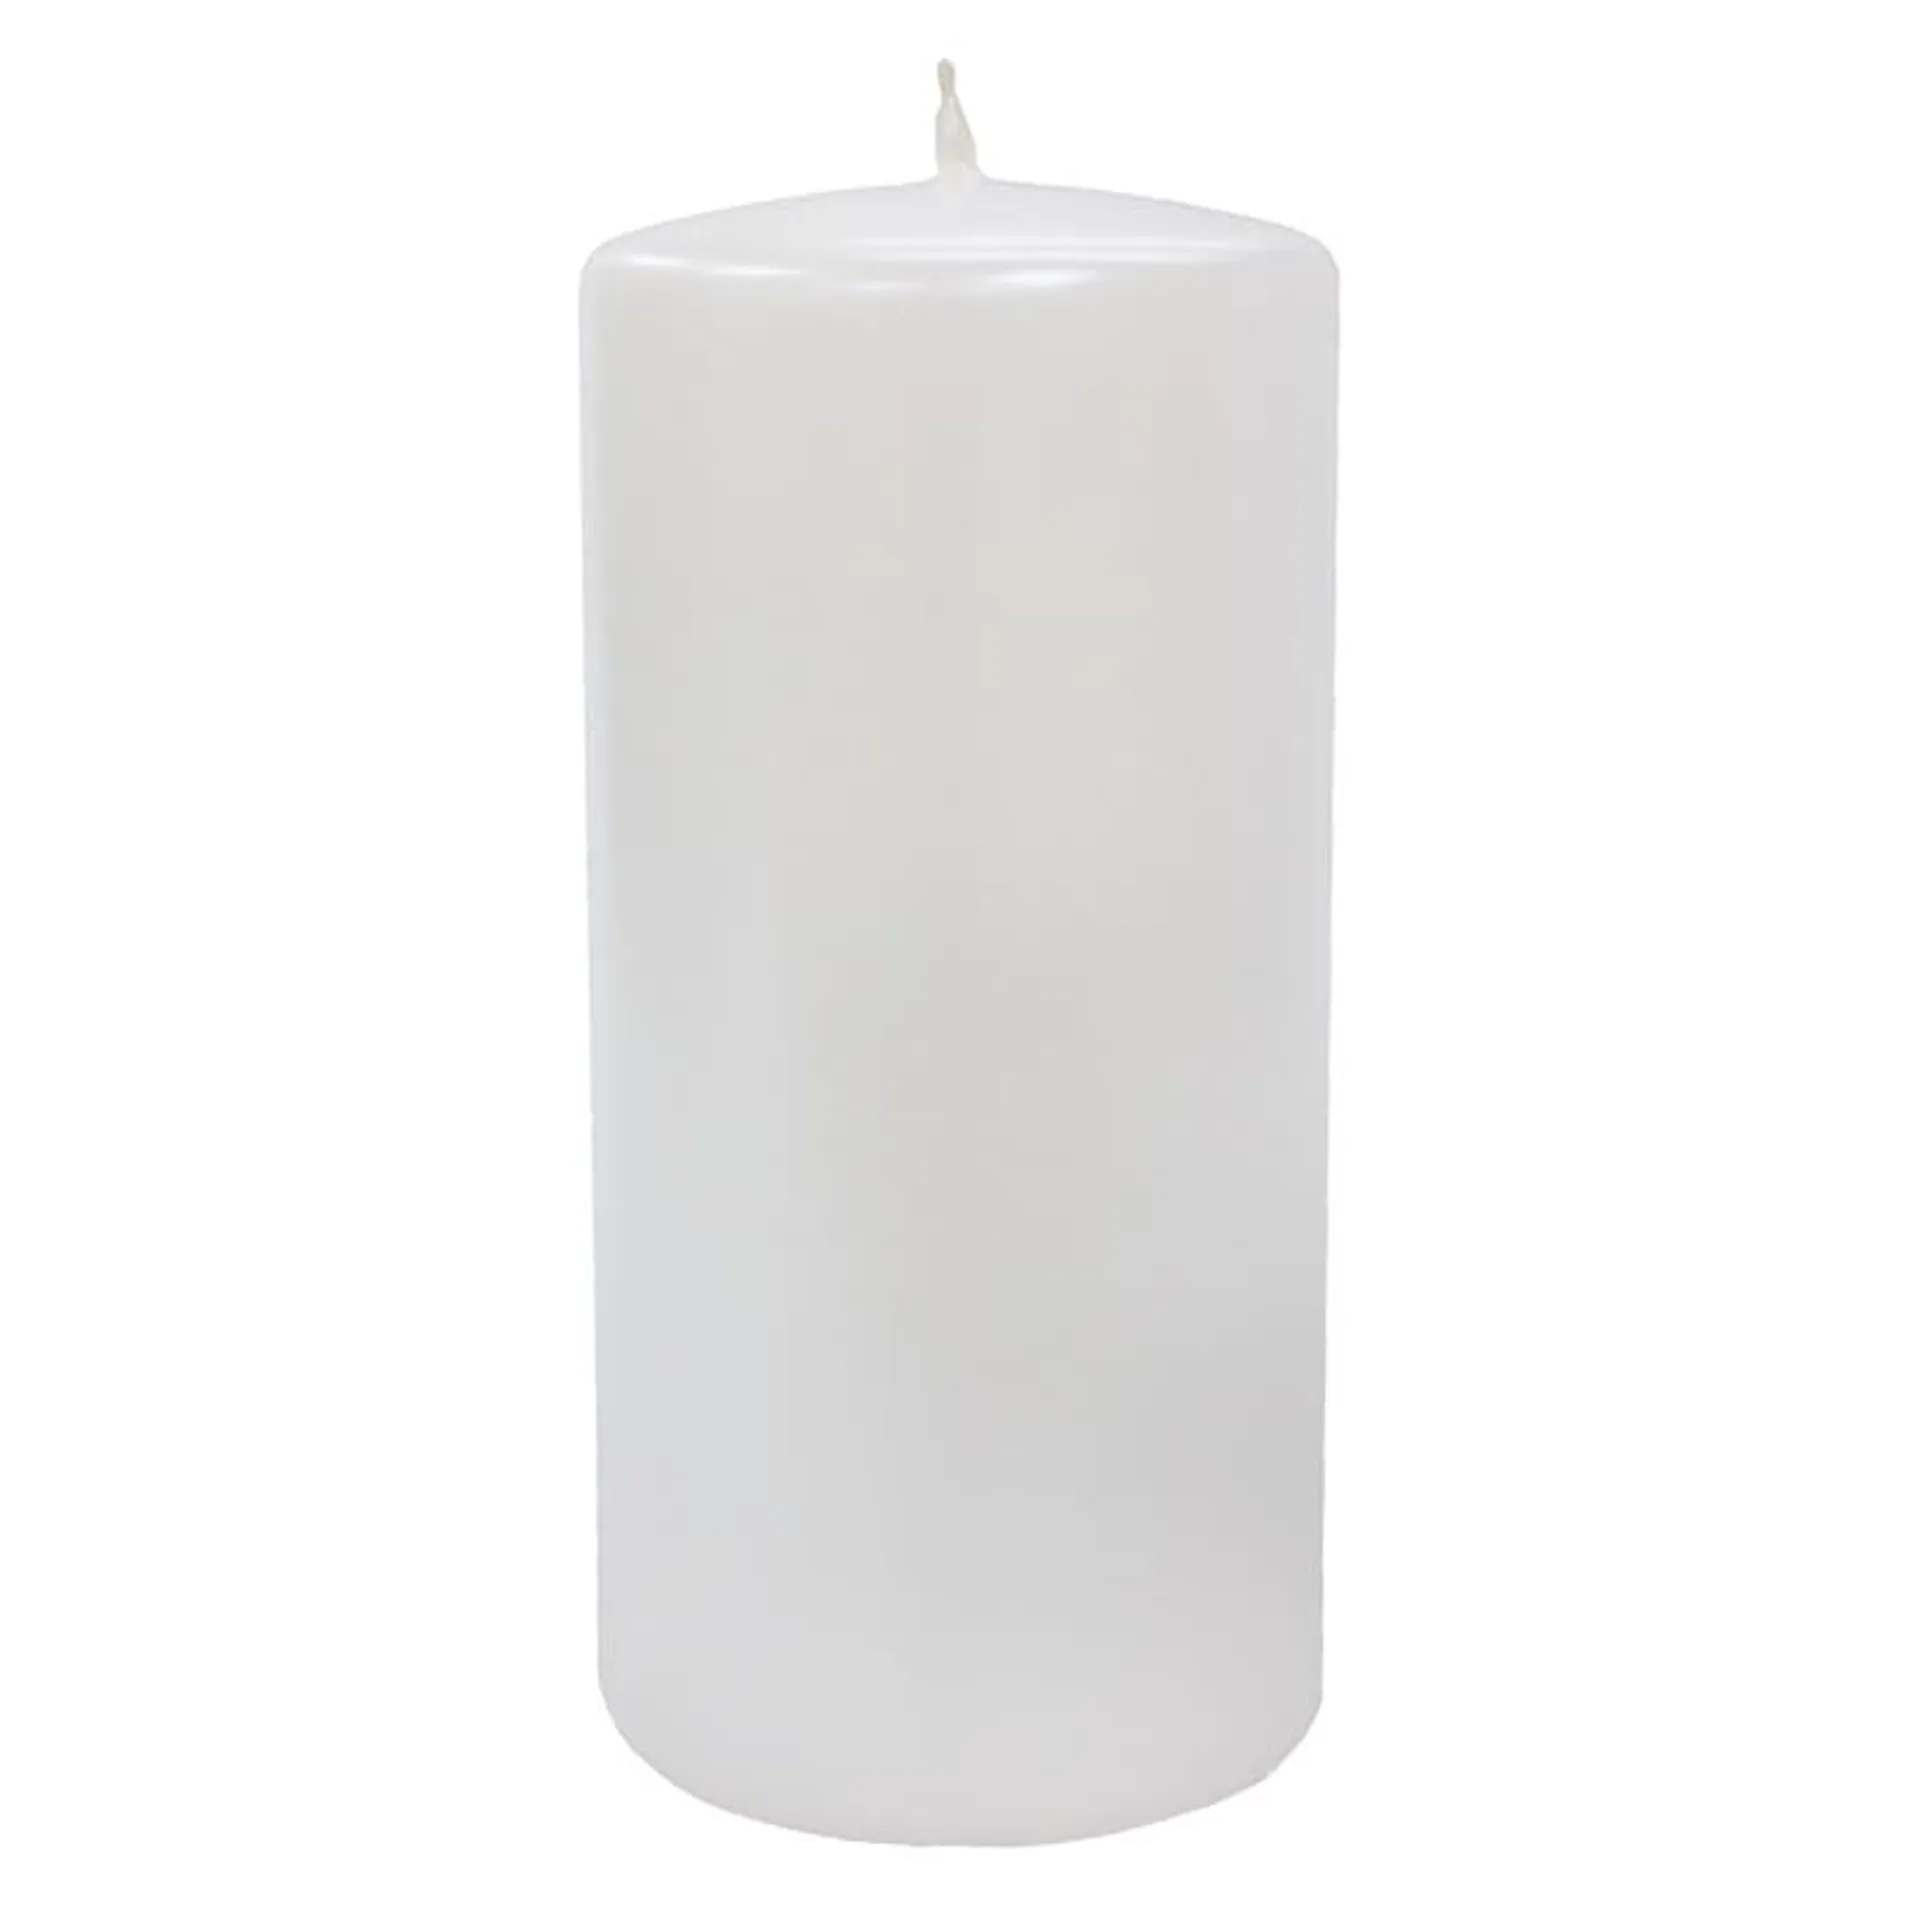 White Pearlized Unscented Pillar Candle, 6"